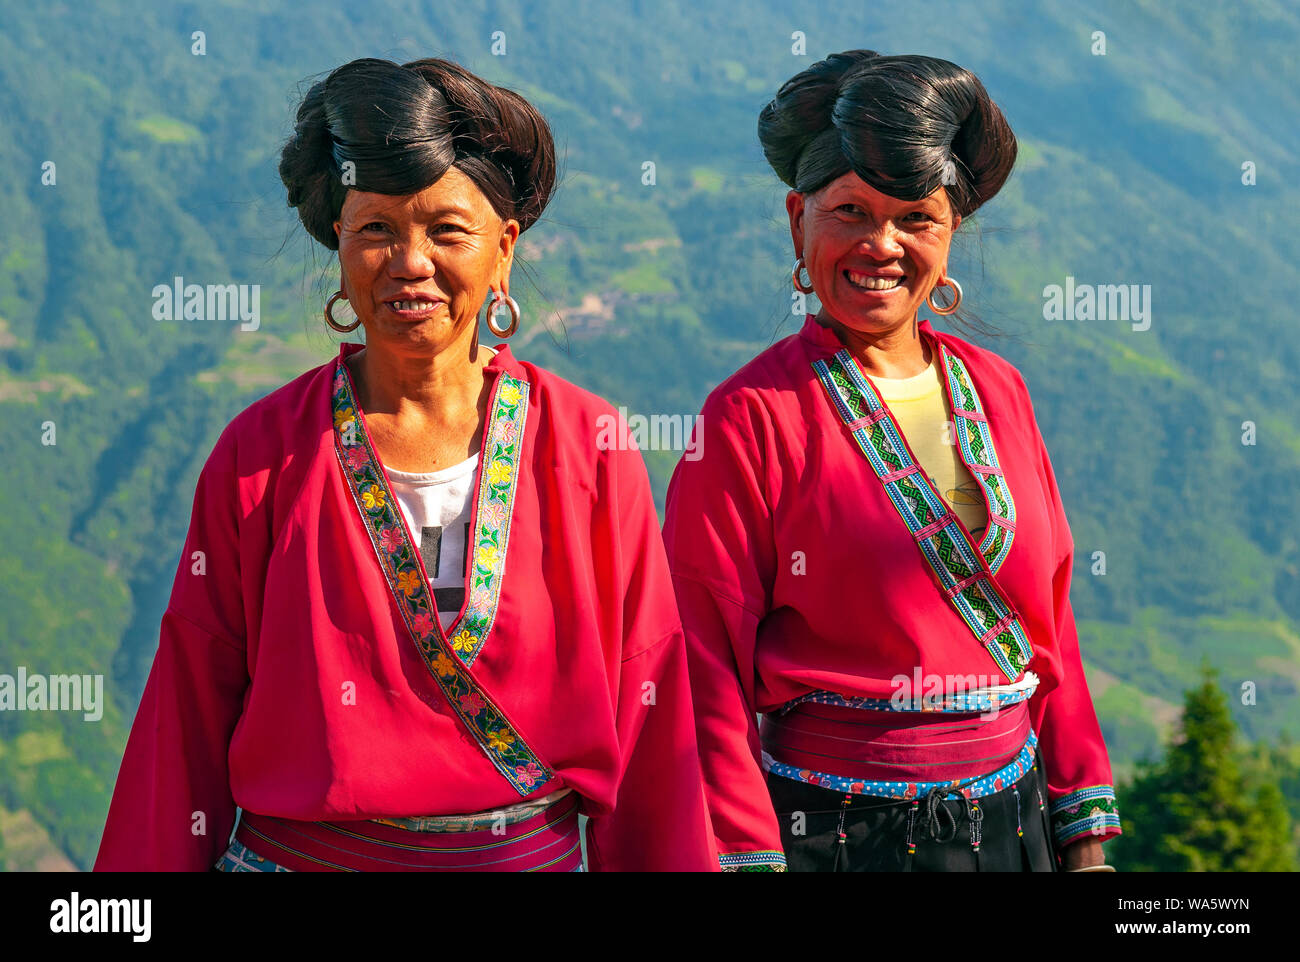 Smiling long haired women of the Yao ethnic group by the rice terraces of Longsheng Ping An in the Guangxi province, China. Stock Photo